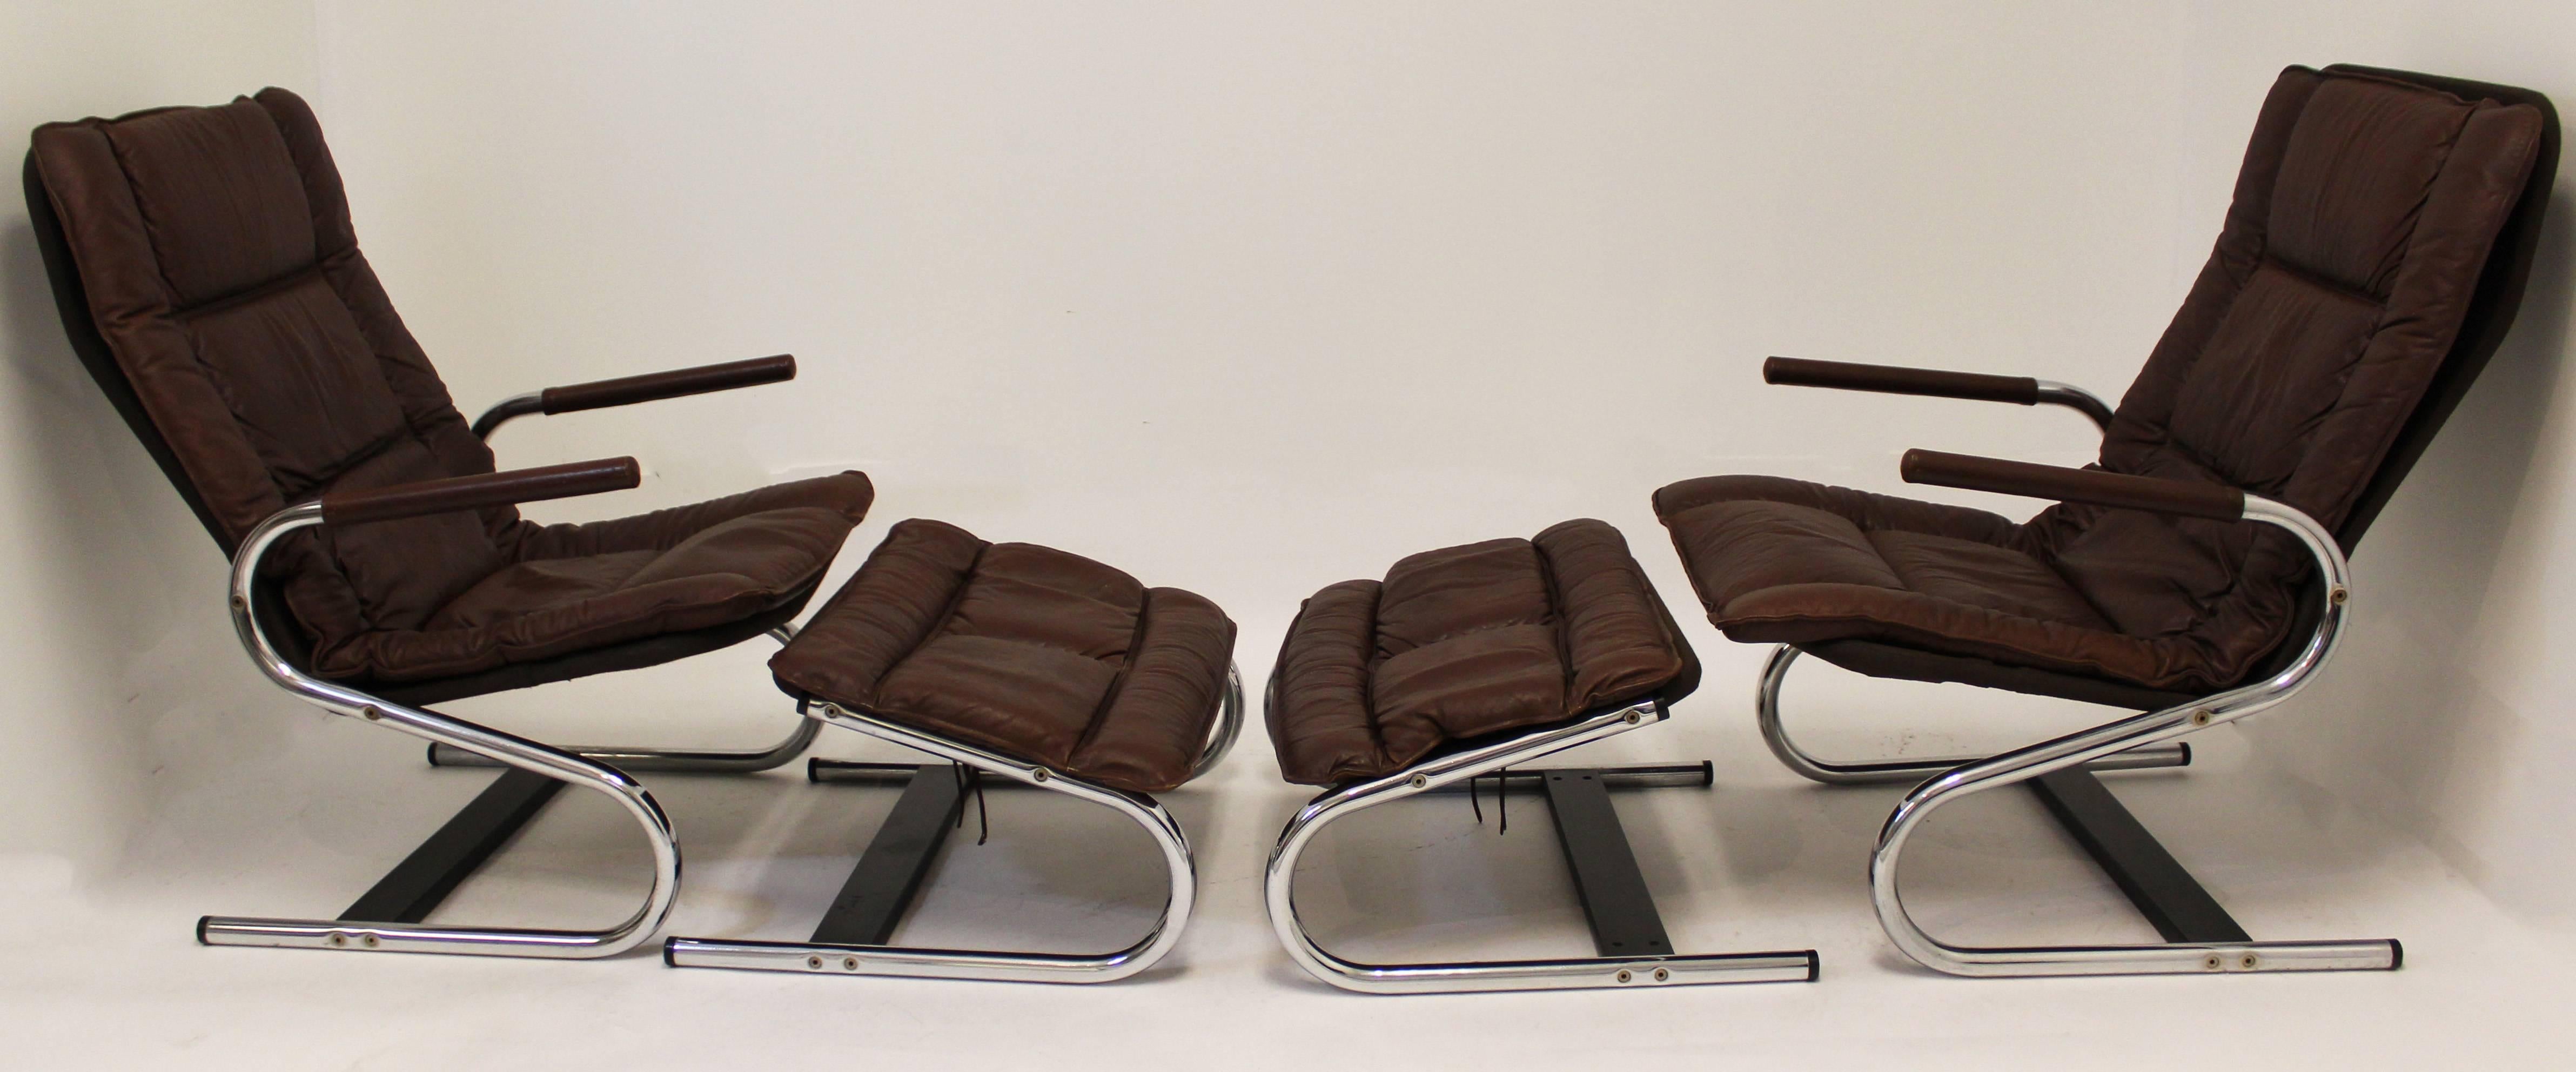 Elegant pair of brown leather and chrome lounge chairs and ottomans by Ingmar Relling for Westnofa in Norway. In excellent condition. The dimensions of the chairs are 24